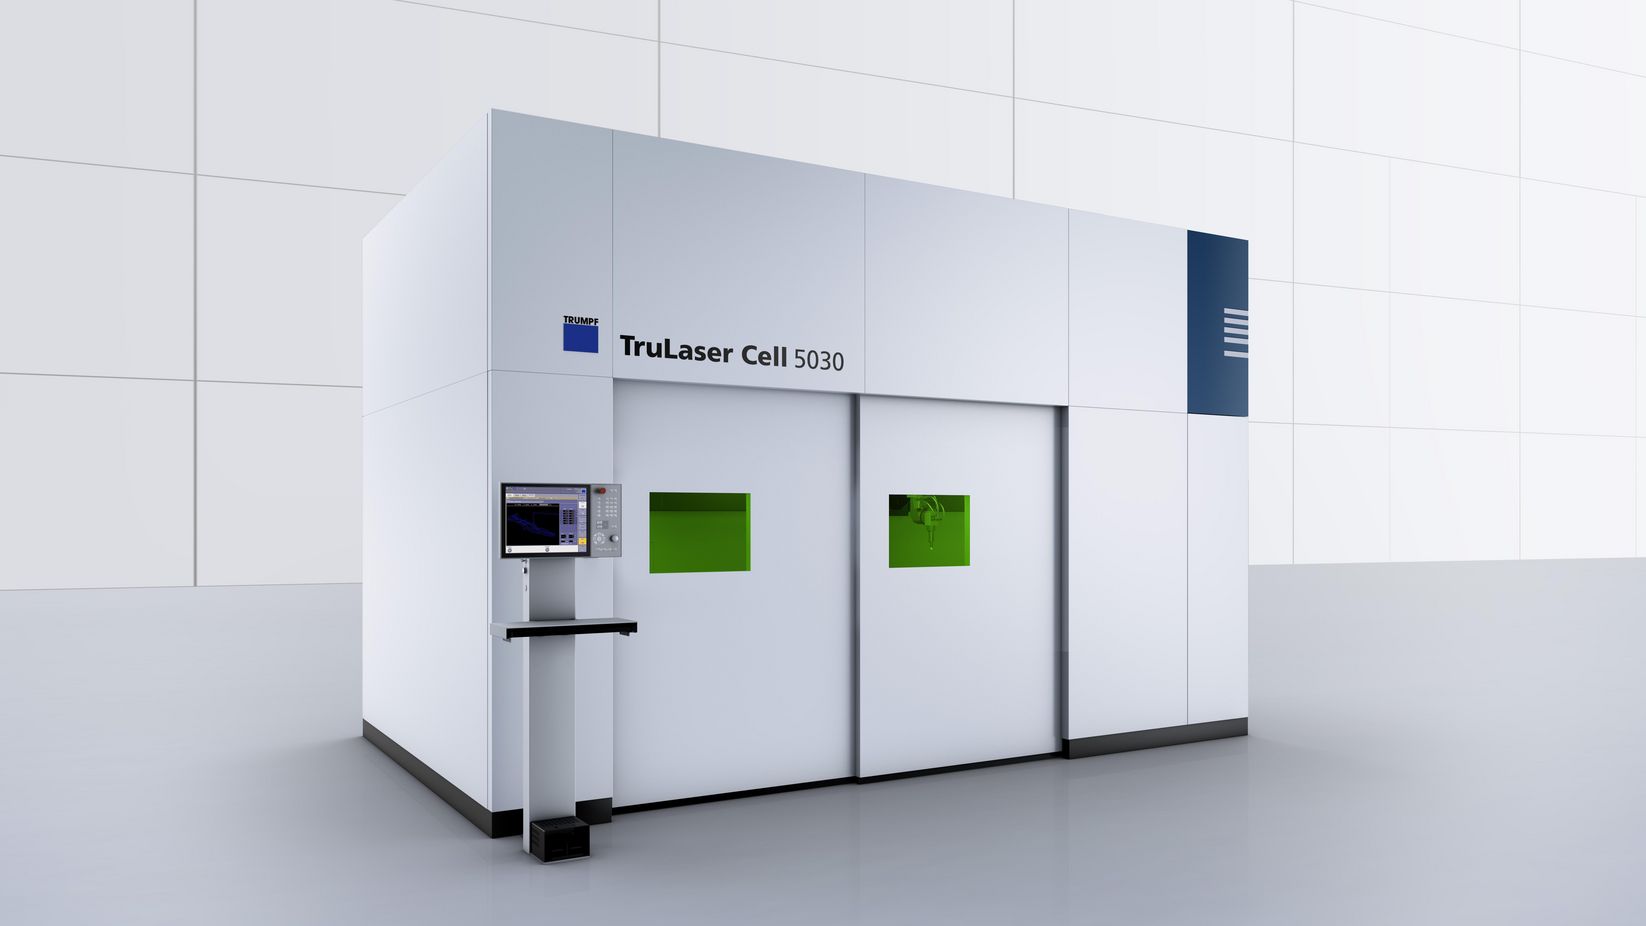 The perfect entry-level machine for flexible 2D and 3D laser cutting
Superb economy: The TruLaser Cell 5030 impresses with its low hourly operating cost. It is ideally suited to small and medium lot sizes and for applications where components are frequently changed. It comes with an energy-efficient, low-maintenance TruDisk solid-state laser as well as a wealth of functions from the tried-and-tested TruLaser Cell product groups. As such, the TruLaser Cell 5030 is the ideal introduction to flexible 2D and 3D laser cutting.
 